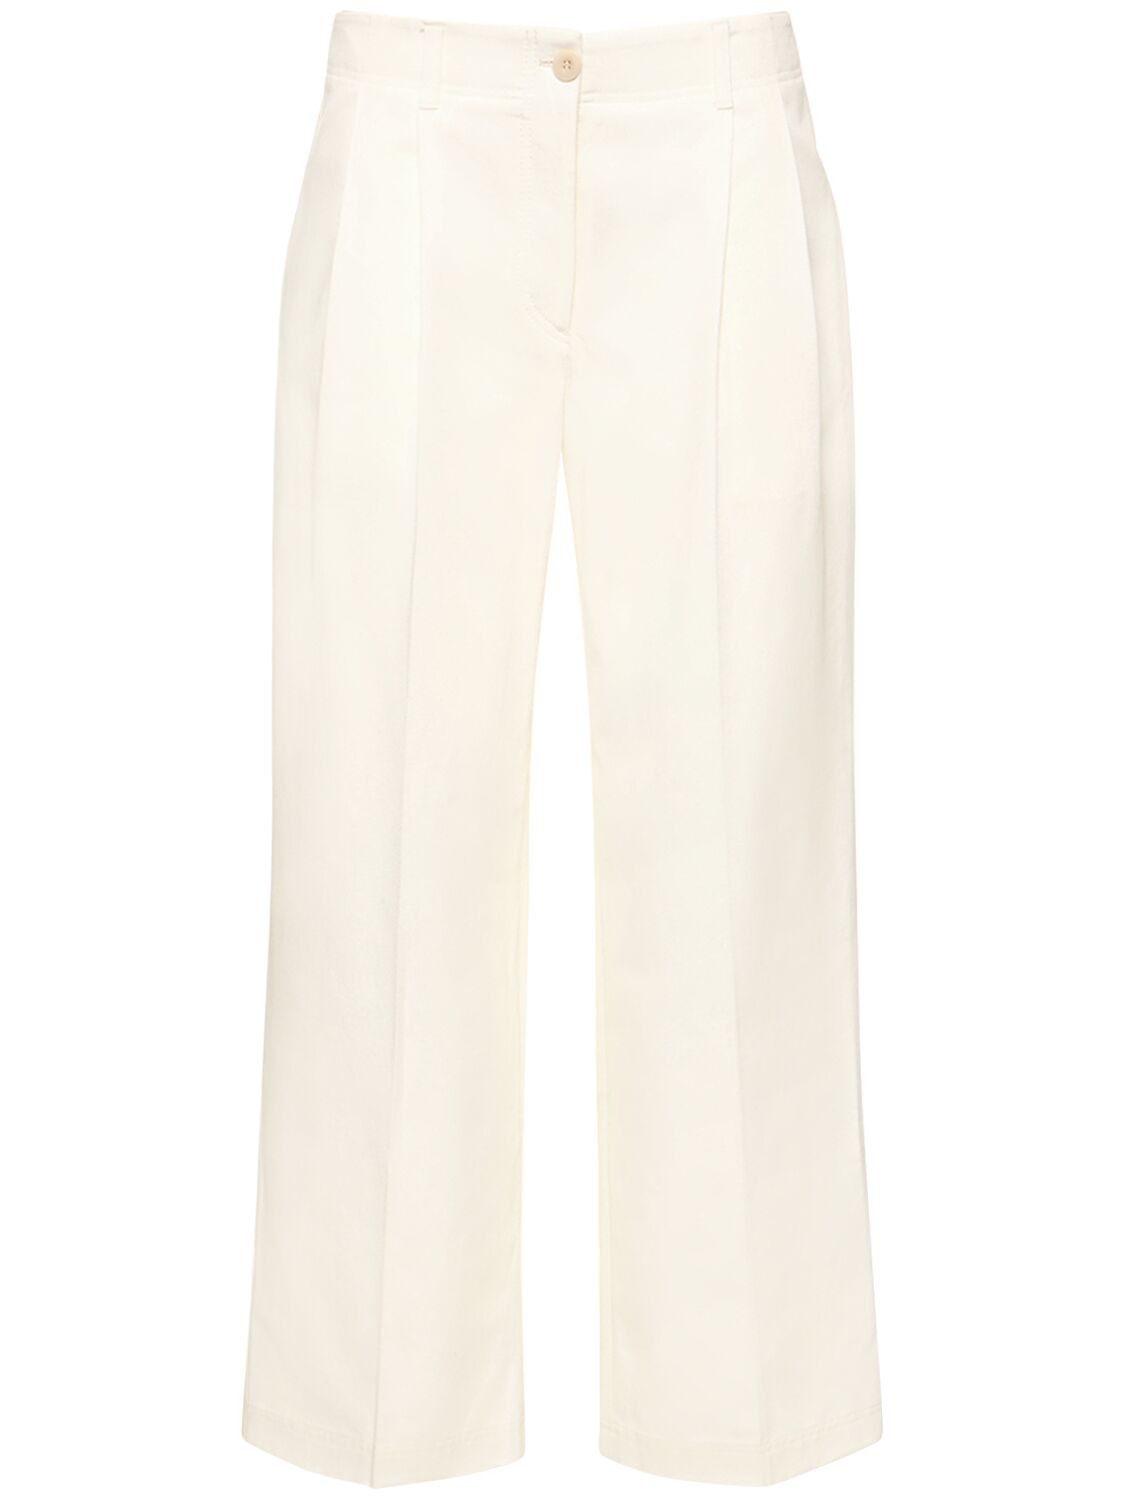 Relaxed Twill Cotton Pants